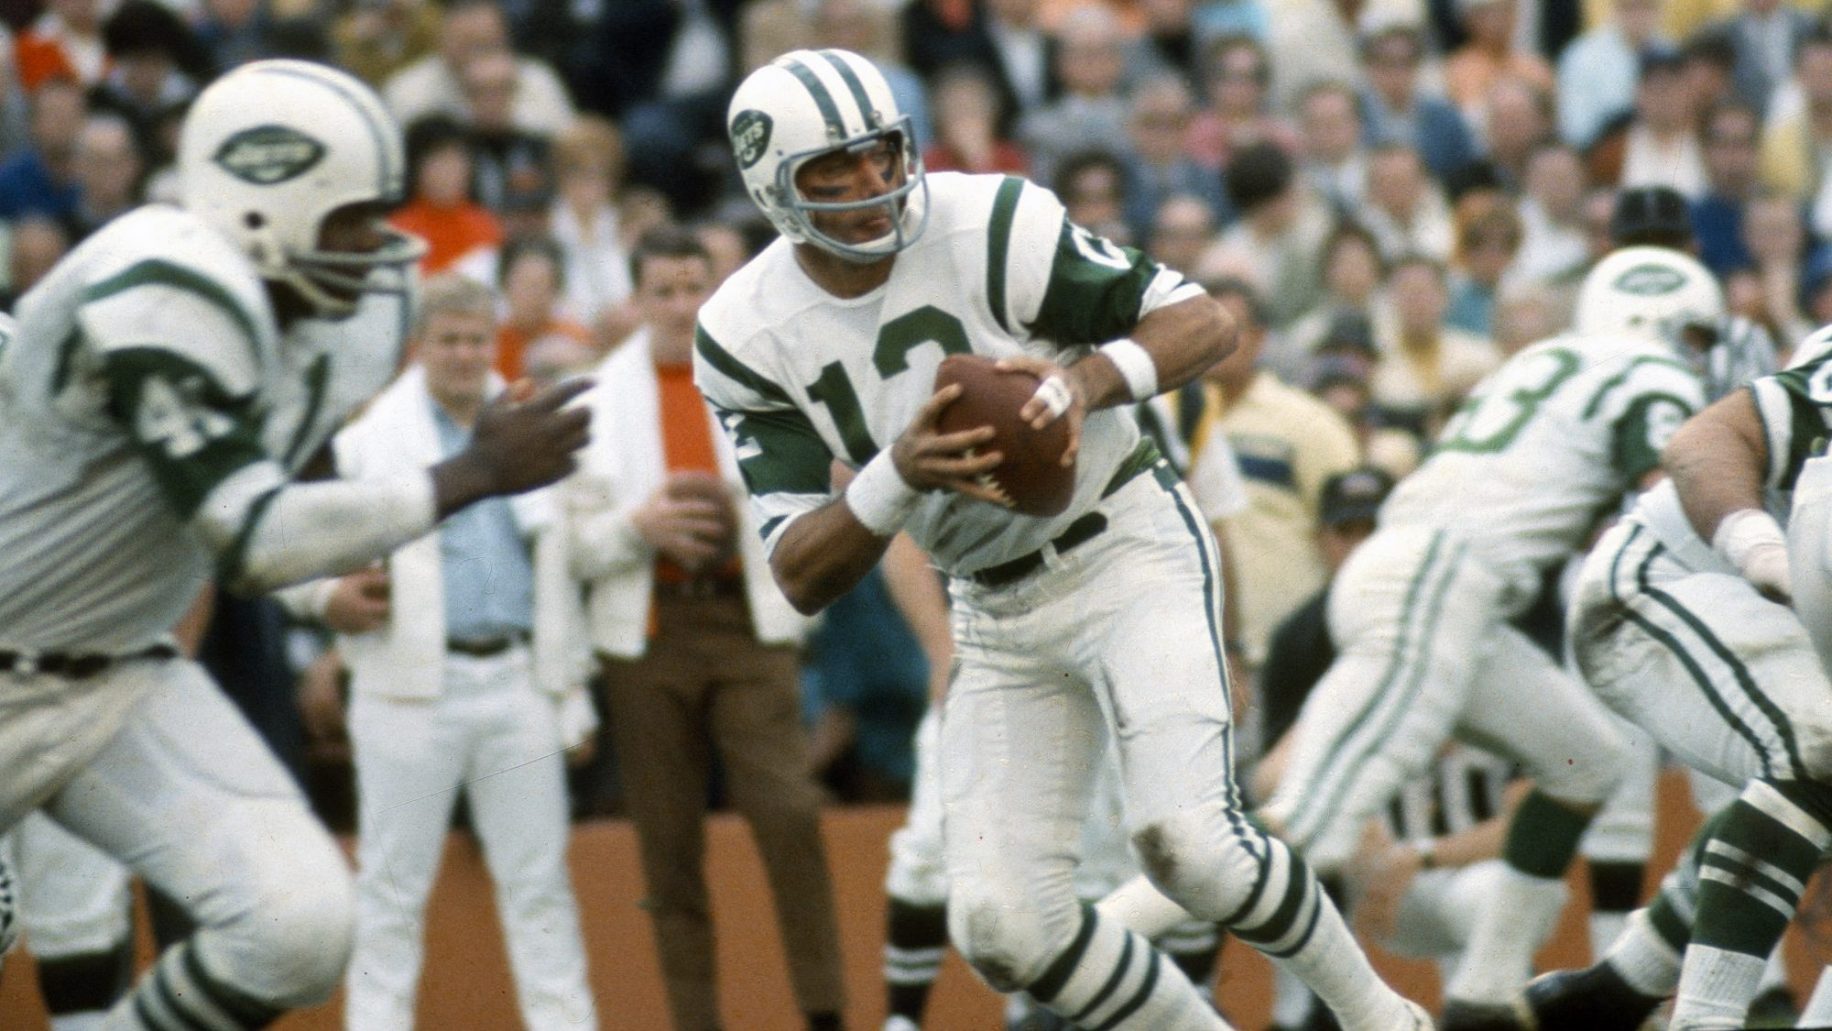 Analyzing New York Jets History: The AFL Years